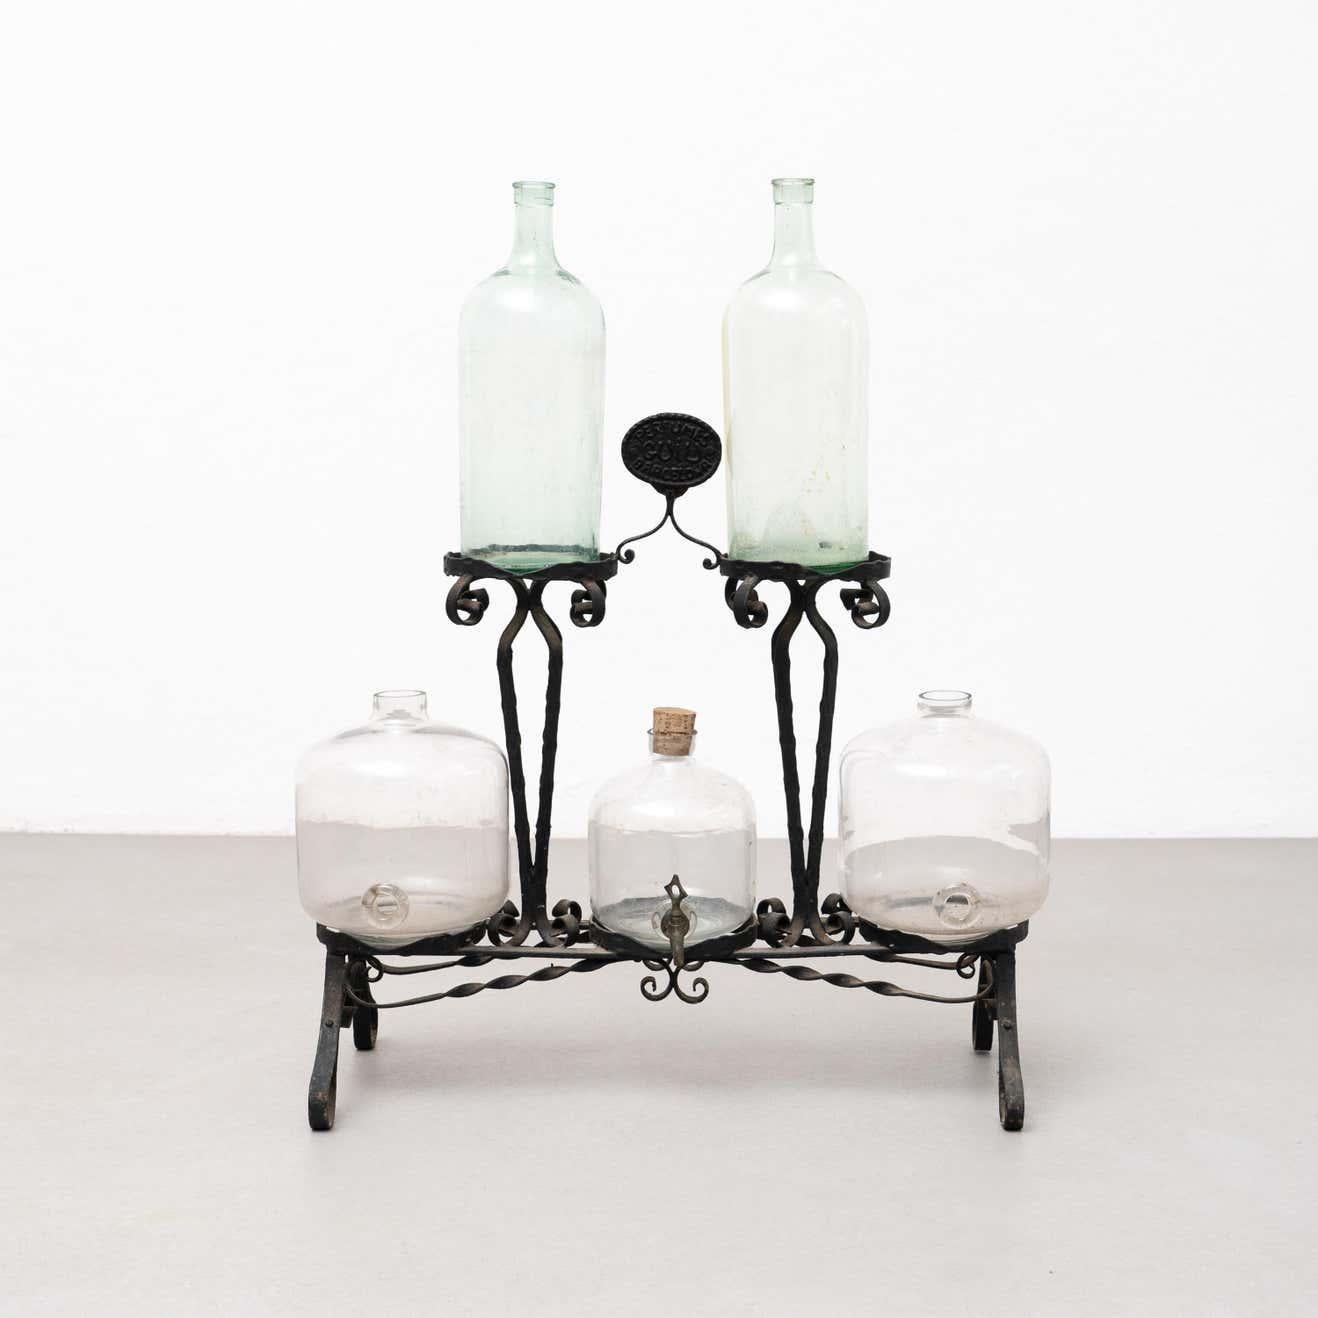 This antique display counter is a rare and beautiful piece of the Modernist movement in Barcelona, Spain. The ornate forged iron structure is stunning and perfectly complements the blown glass bottles, which have a gorgeous patina. One of the glass